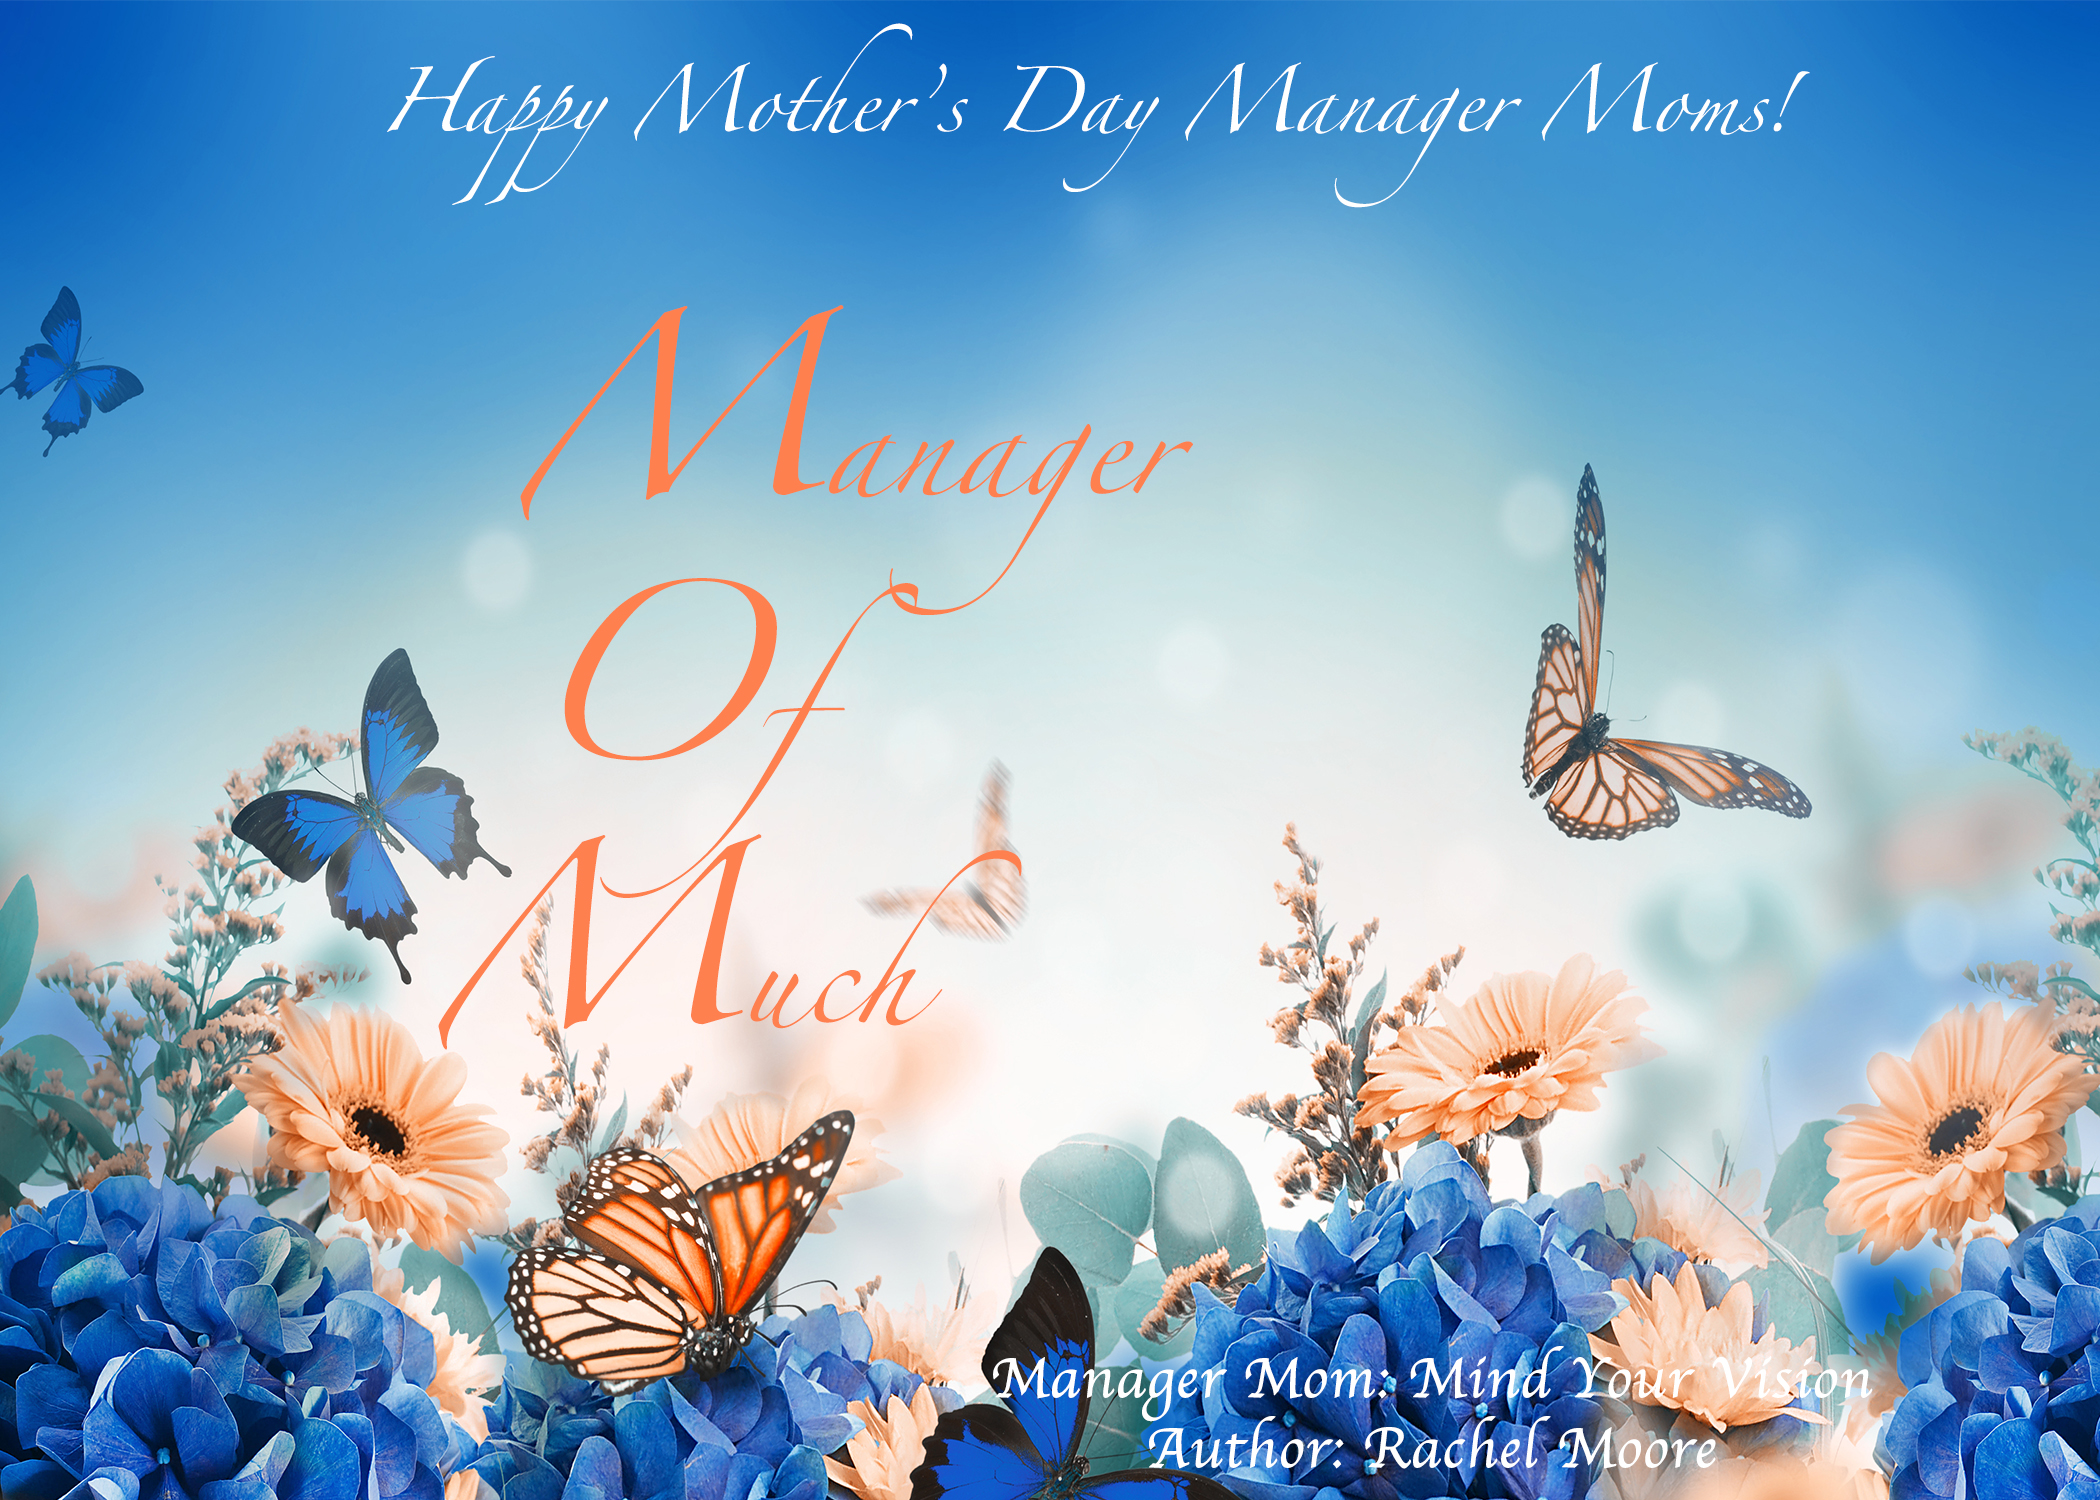 MOM: Manager of Much